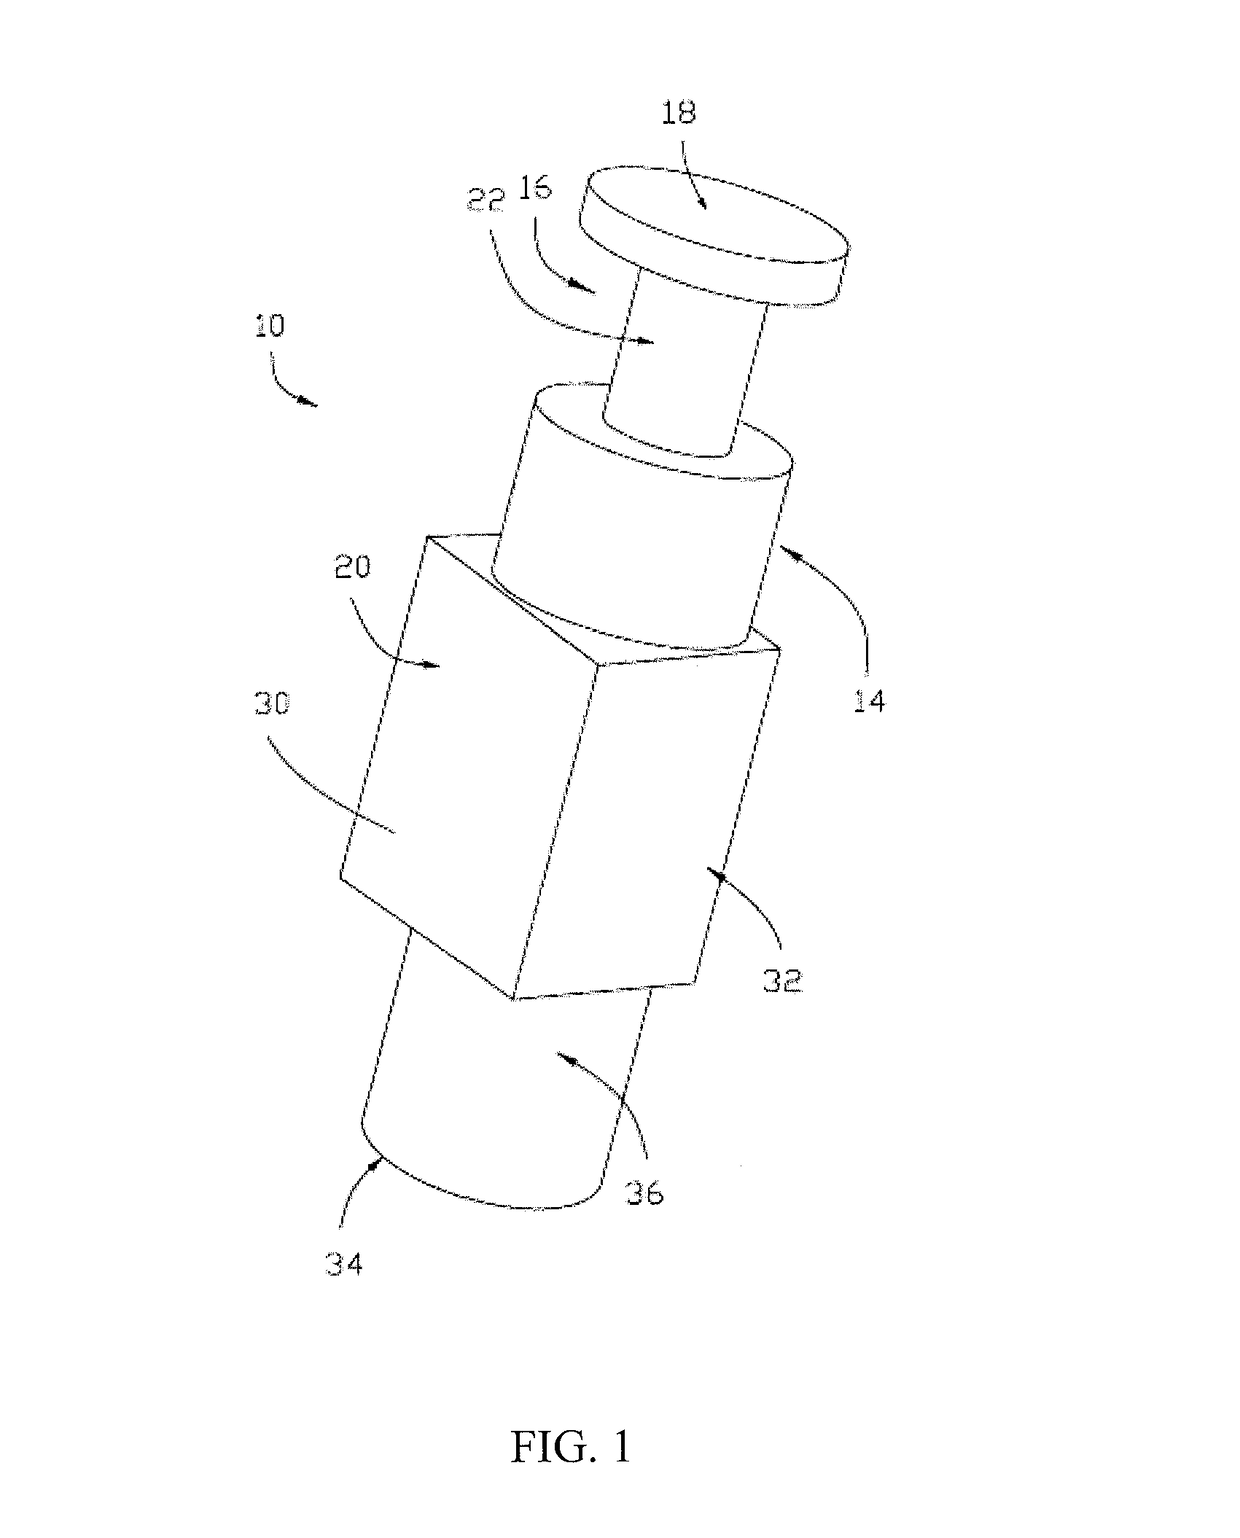 Plunger for magnetic latching solenoid actuator